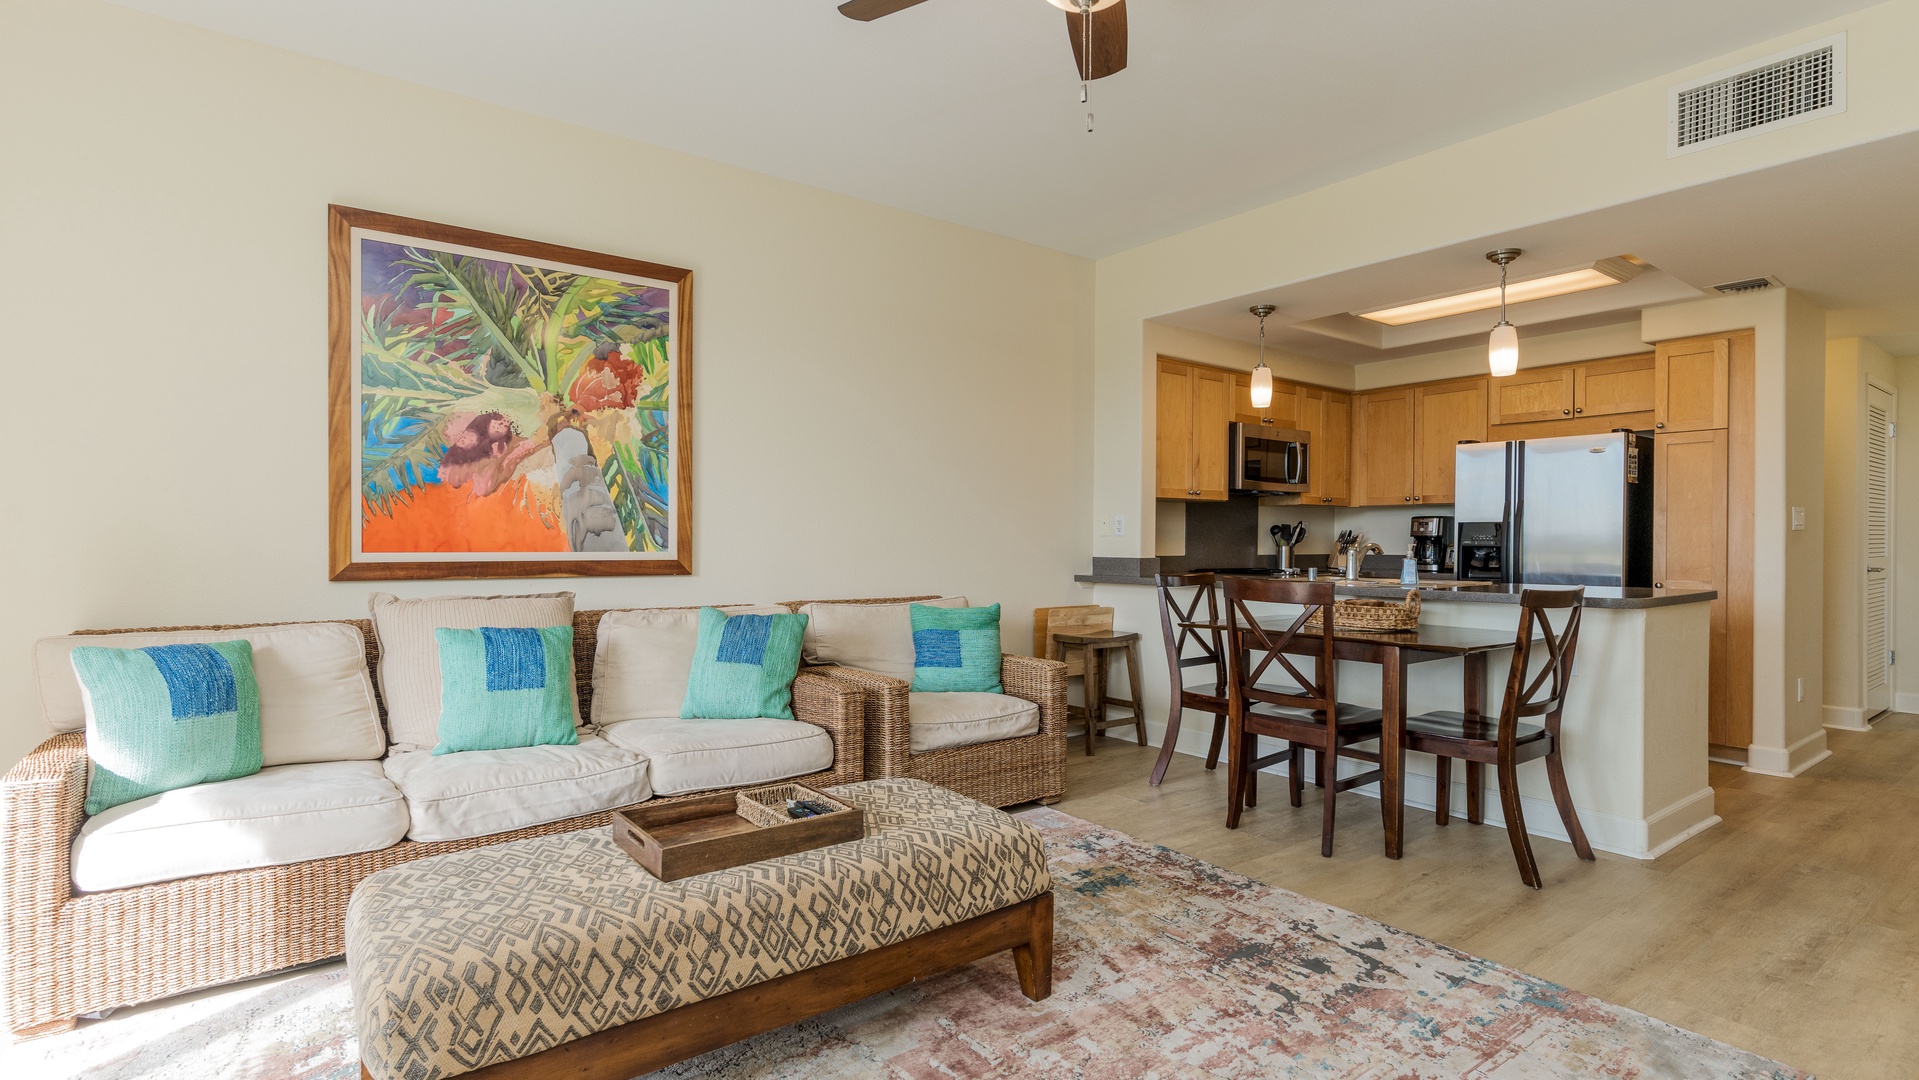 Kapolei Vacation Rentals, Hillside Villas 1496-3 - Fully-stocked kitchen right off the living space.